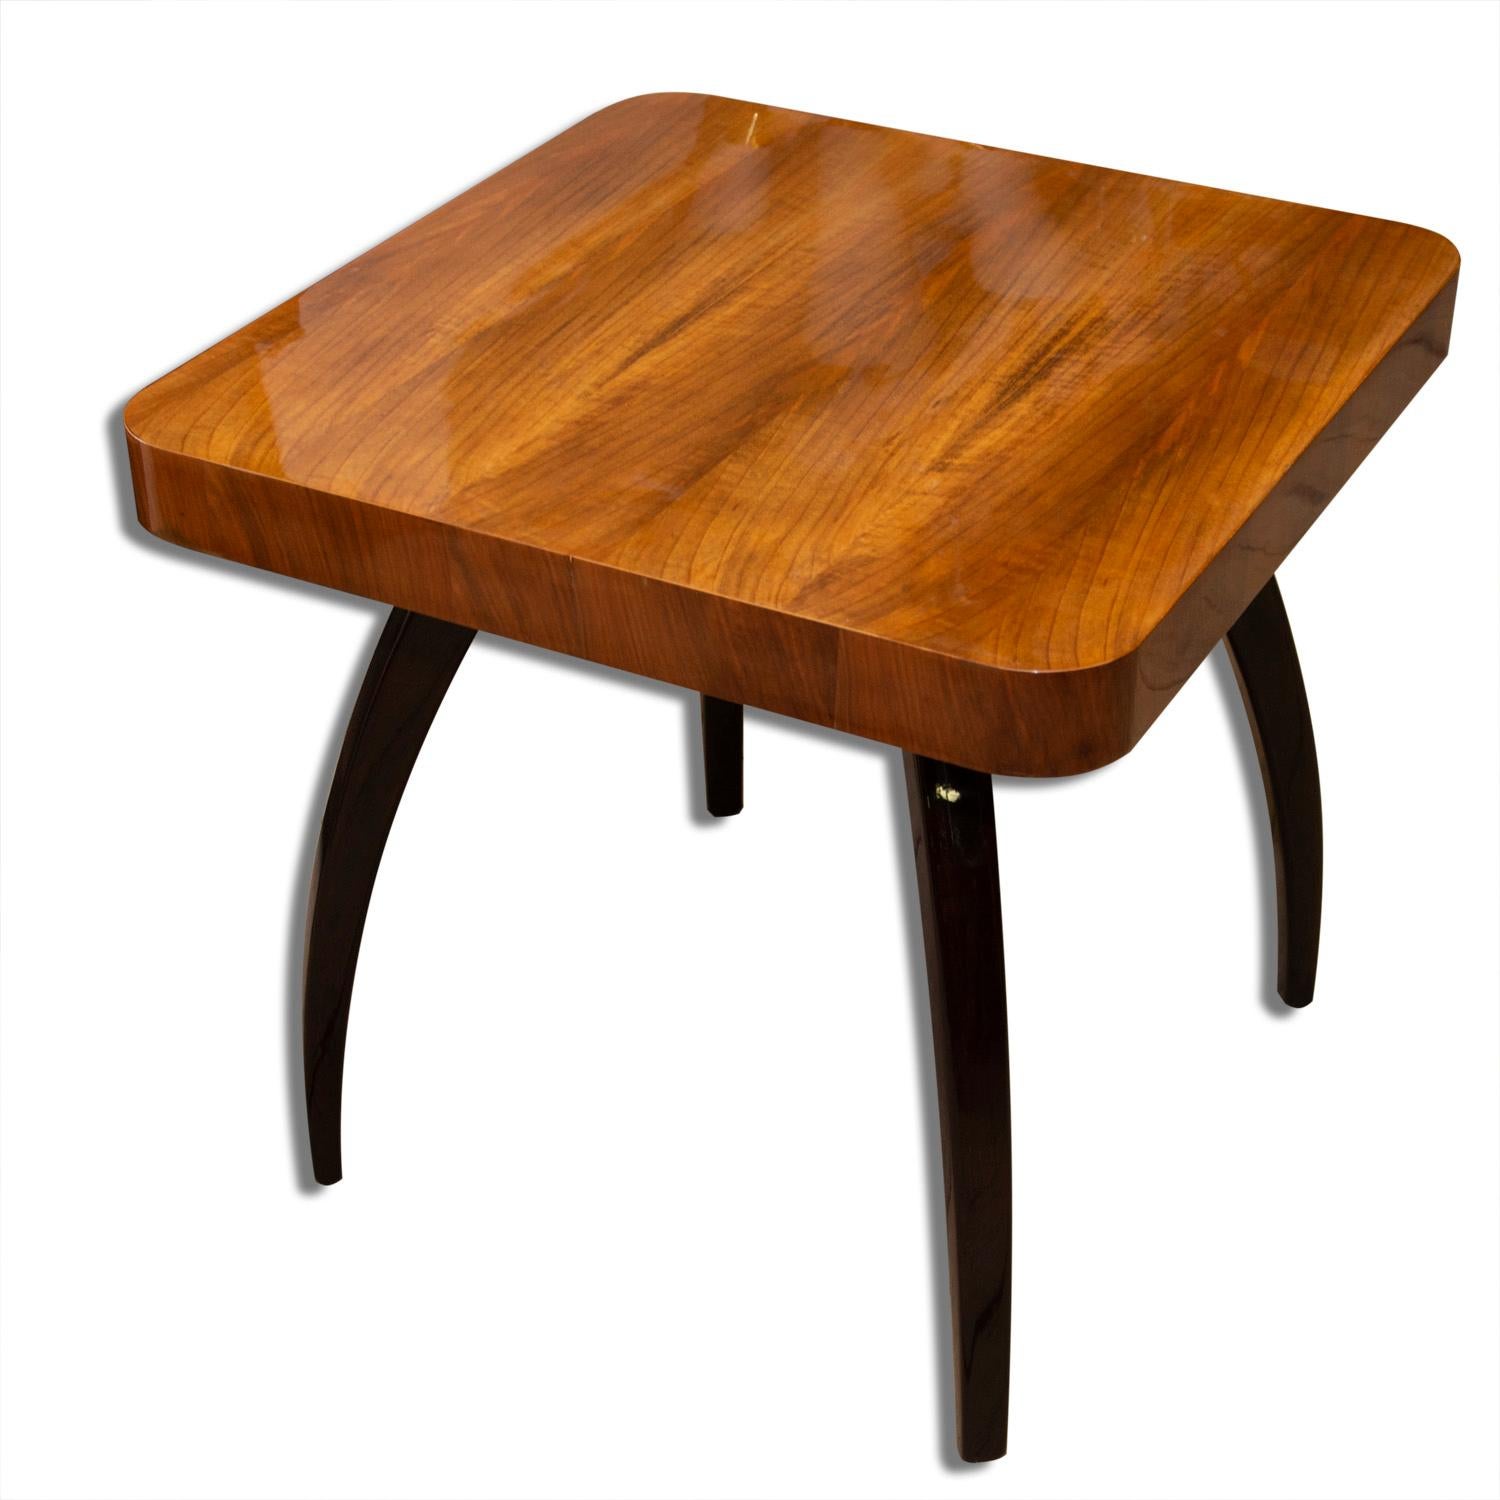 This walnut table called spider was designed by the world famous architect Jindrich Halabala under catalog No. H-259 in the 1930s and produced in the 1950s. Unique style of this table is recognized all-over the world. The table stands on four legs